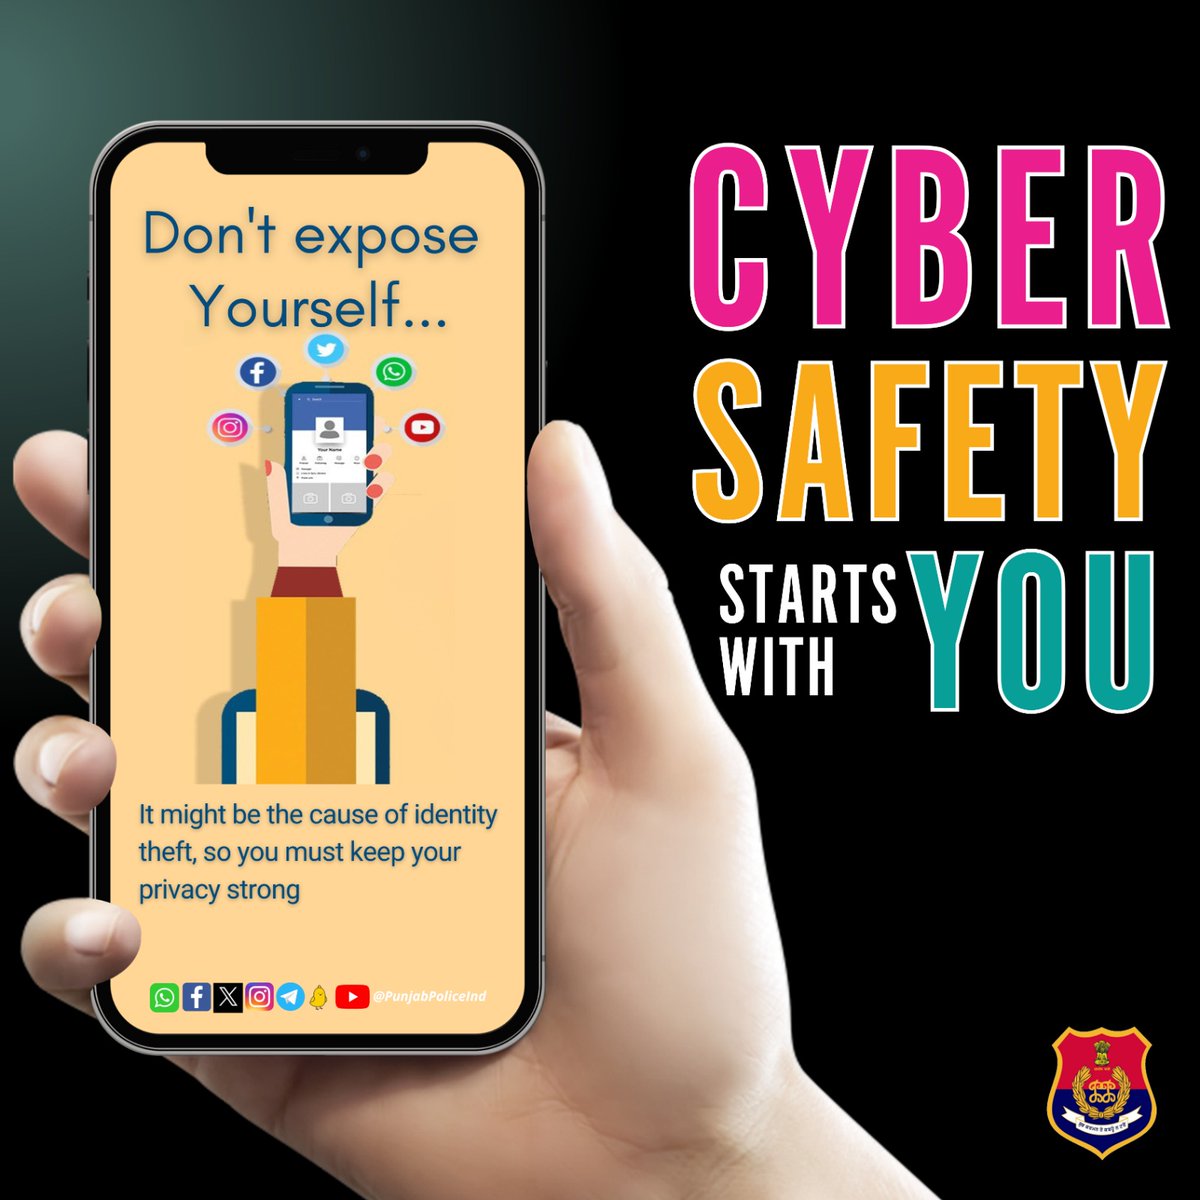 Stay vigilant! Cybercrime is real and can happen to anyone. Protect your personal information and avoid oversharing on social media. #CyberAware